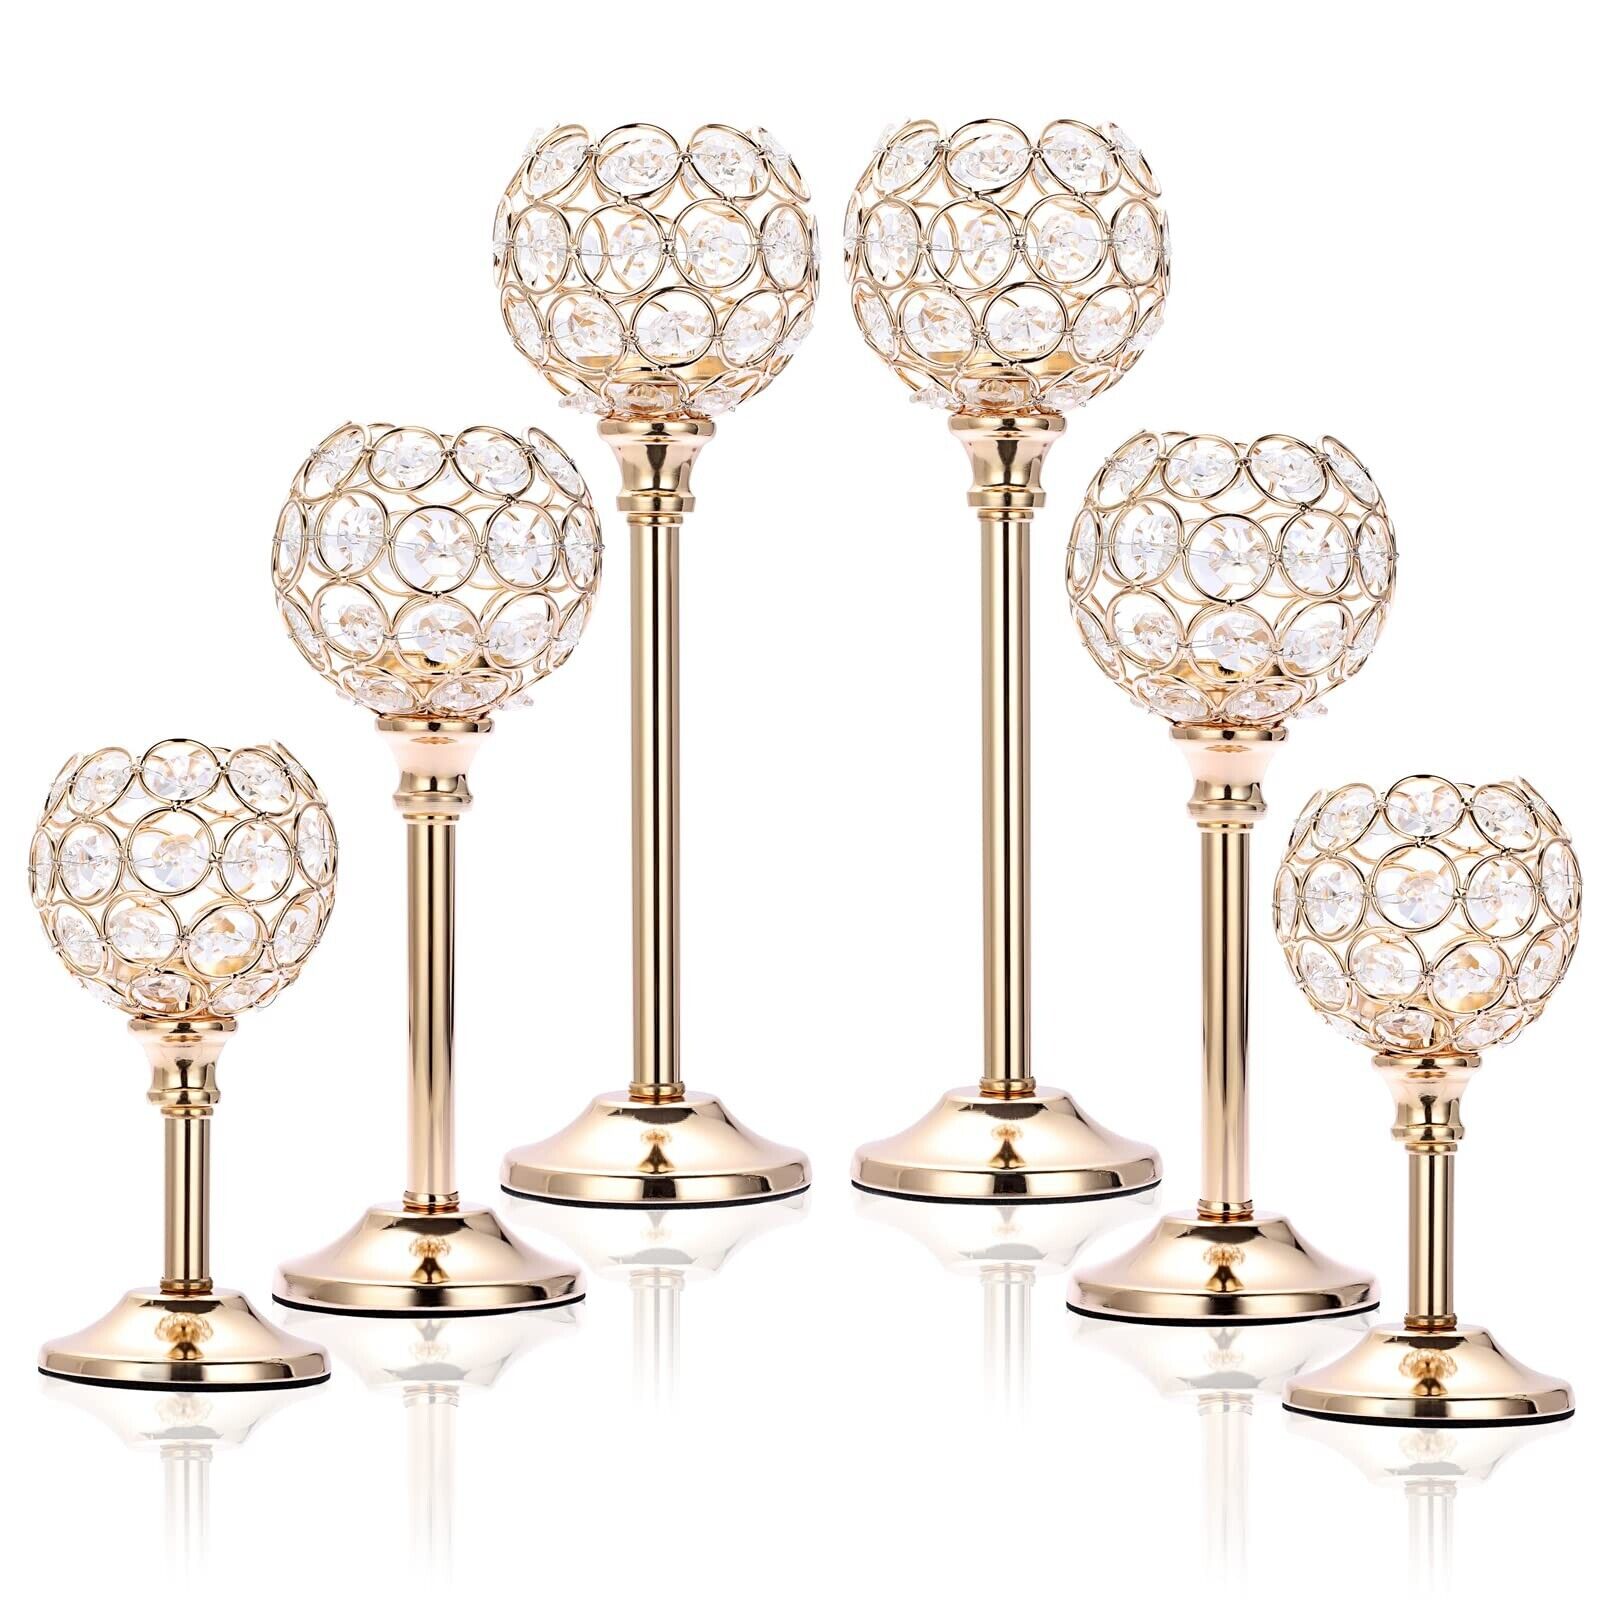 OwnMy Set of 6 Crystal Tealight Candlestick Holders Metal Crystal Bowl Candel...